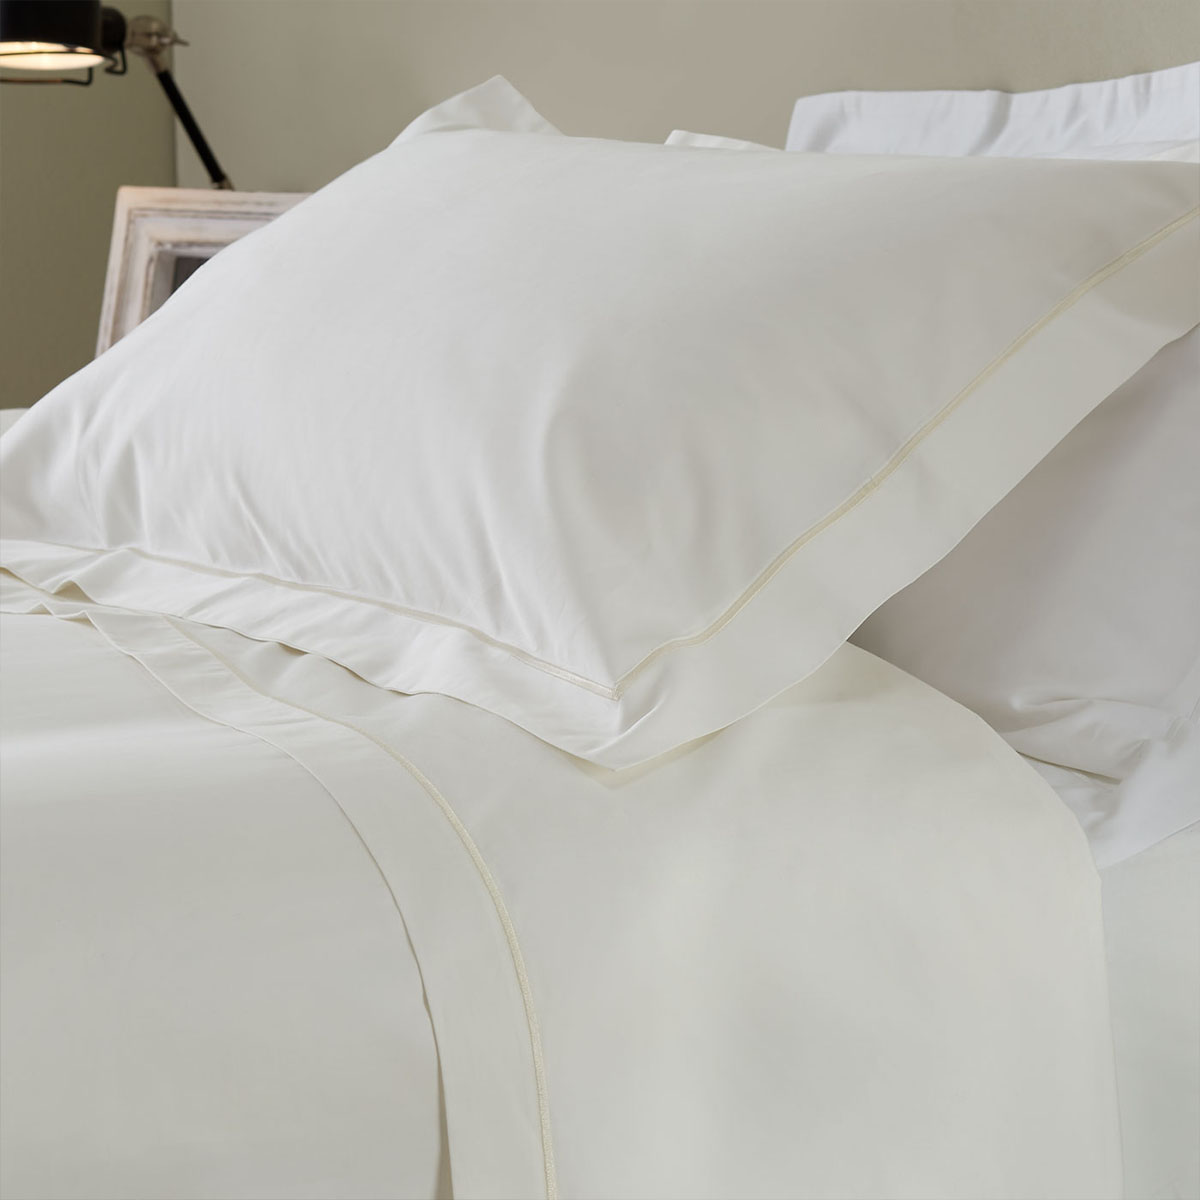 Ivory 200 Thread Count Egyptian Cotton Single Duvet Cover